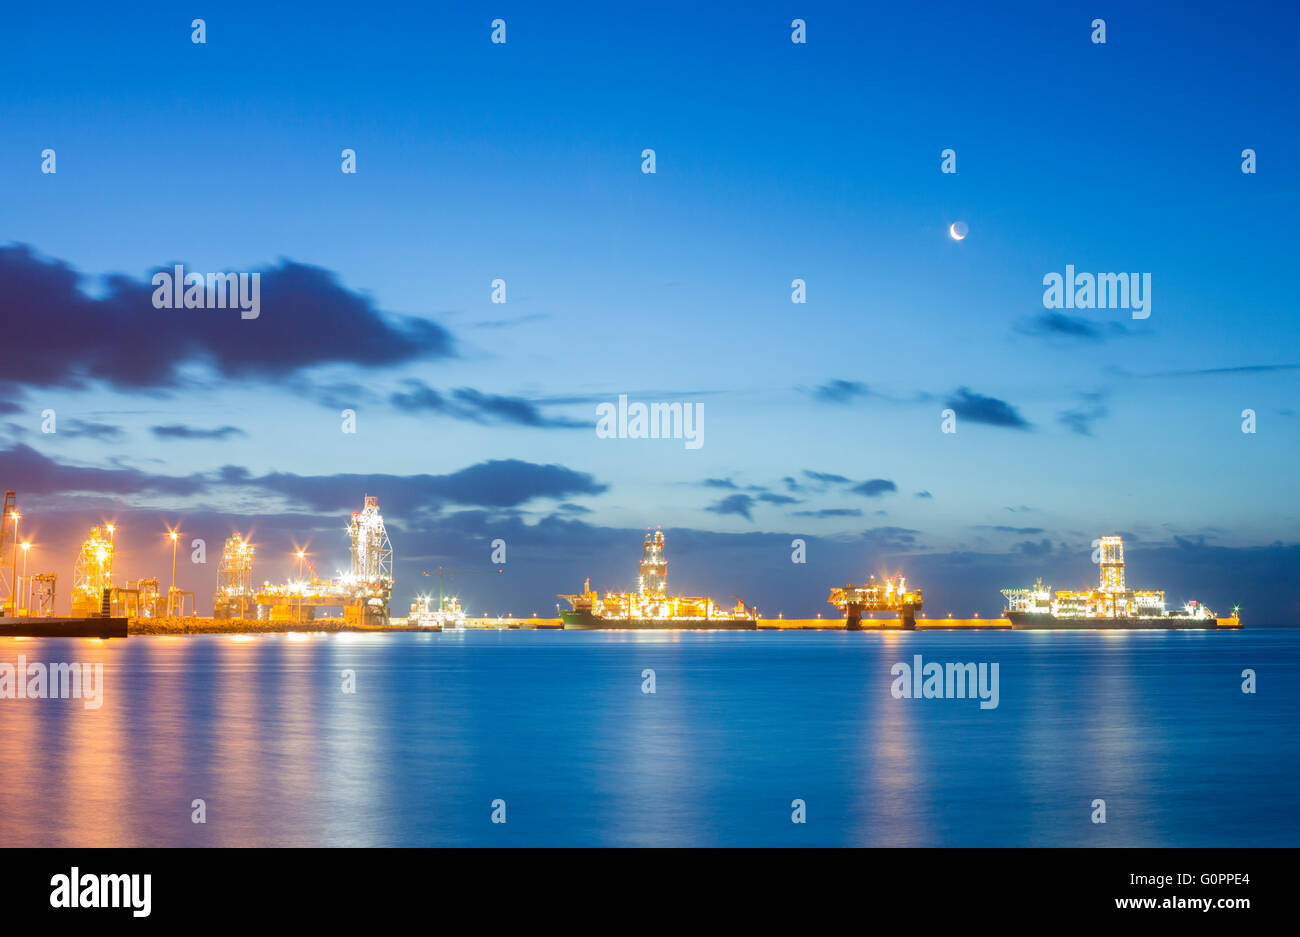 Rigs at dawn, Las Palmas, Gran Canaria, Canary Islands, Spain, 4th May 2016. Weather: The Moon rises over  Oil rigs, drilling ships and accomodation platform in pre dawn light in Las Palmas port on a glorious Wednesday morning on Gran Canaria. PICTURED: Las Palmas port is used by a number of oil companies for repairs, resupplying, and in the the case of some of the rigs/platforms in these images, for mothballing rigs for long periods due to the fall in oil prices and over supply of crude oil. Credit:  Alan Dawson News/Alamy Live News Stock Photo